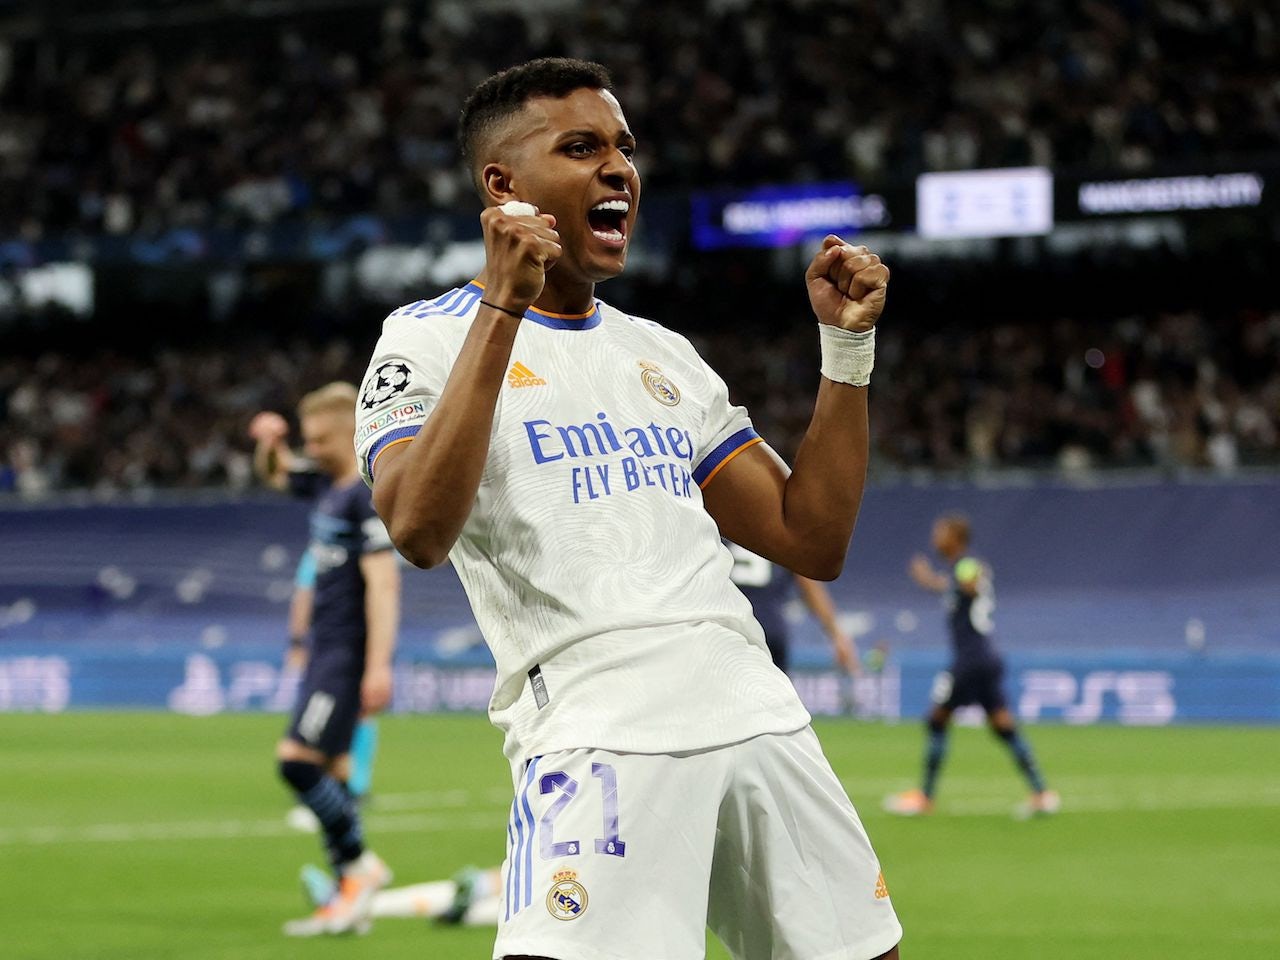 Liverpool to move for Real Madrid's Rodrygo as Sadio Mane replacement?